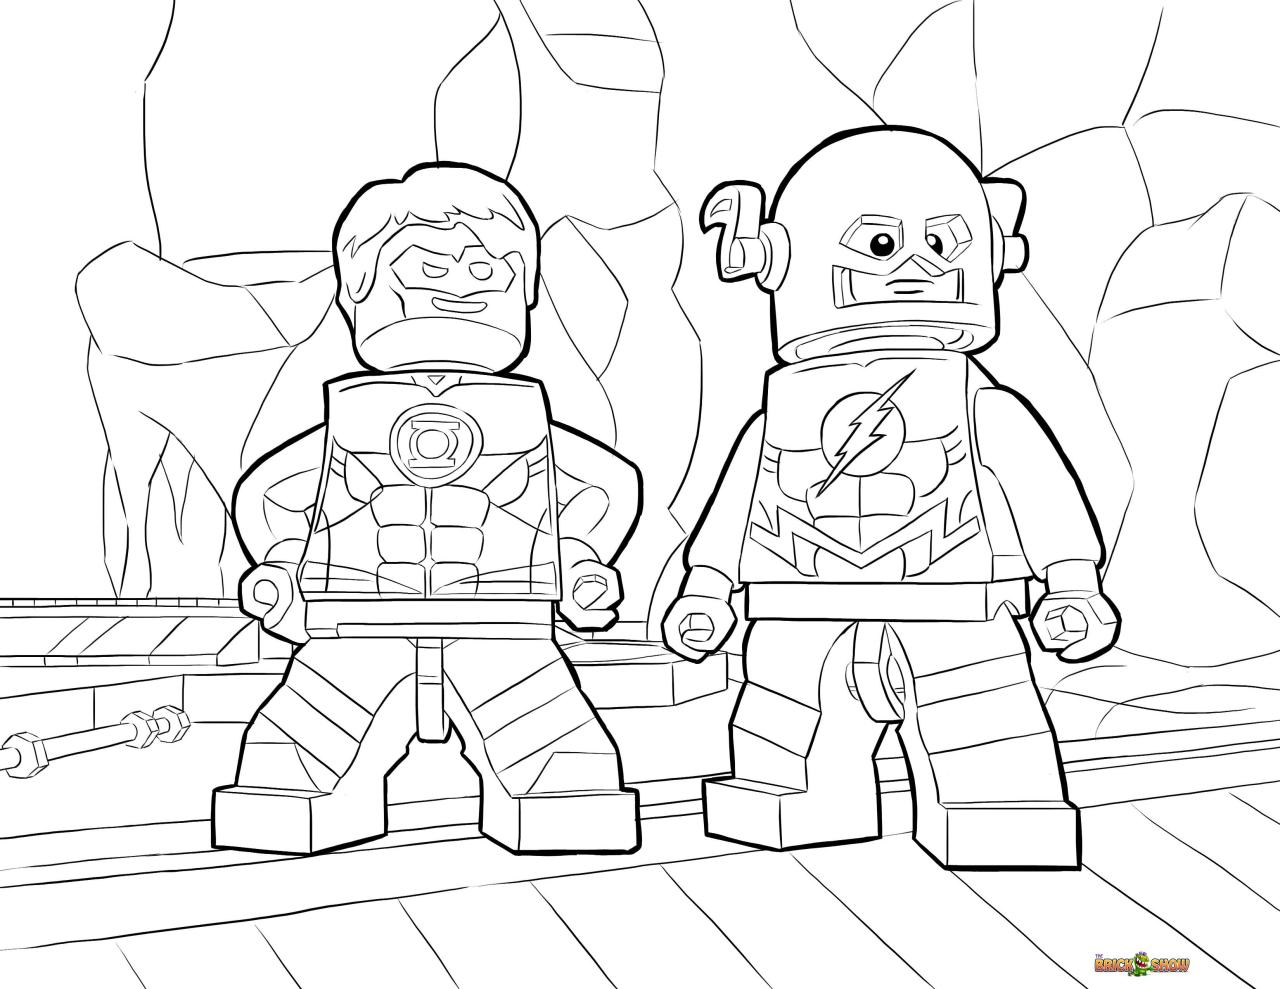 Mexico Coloring Pages